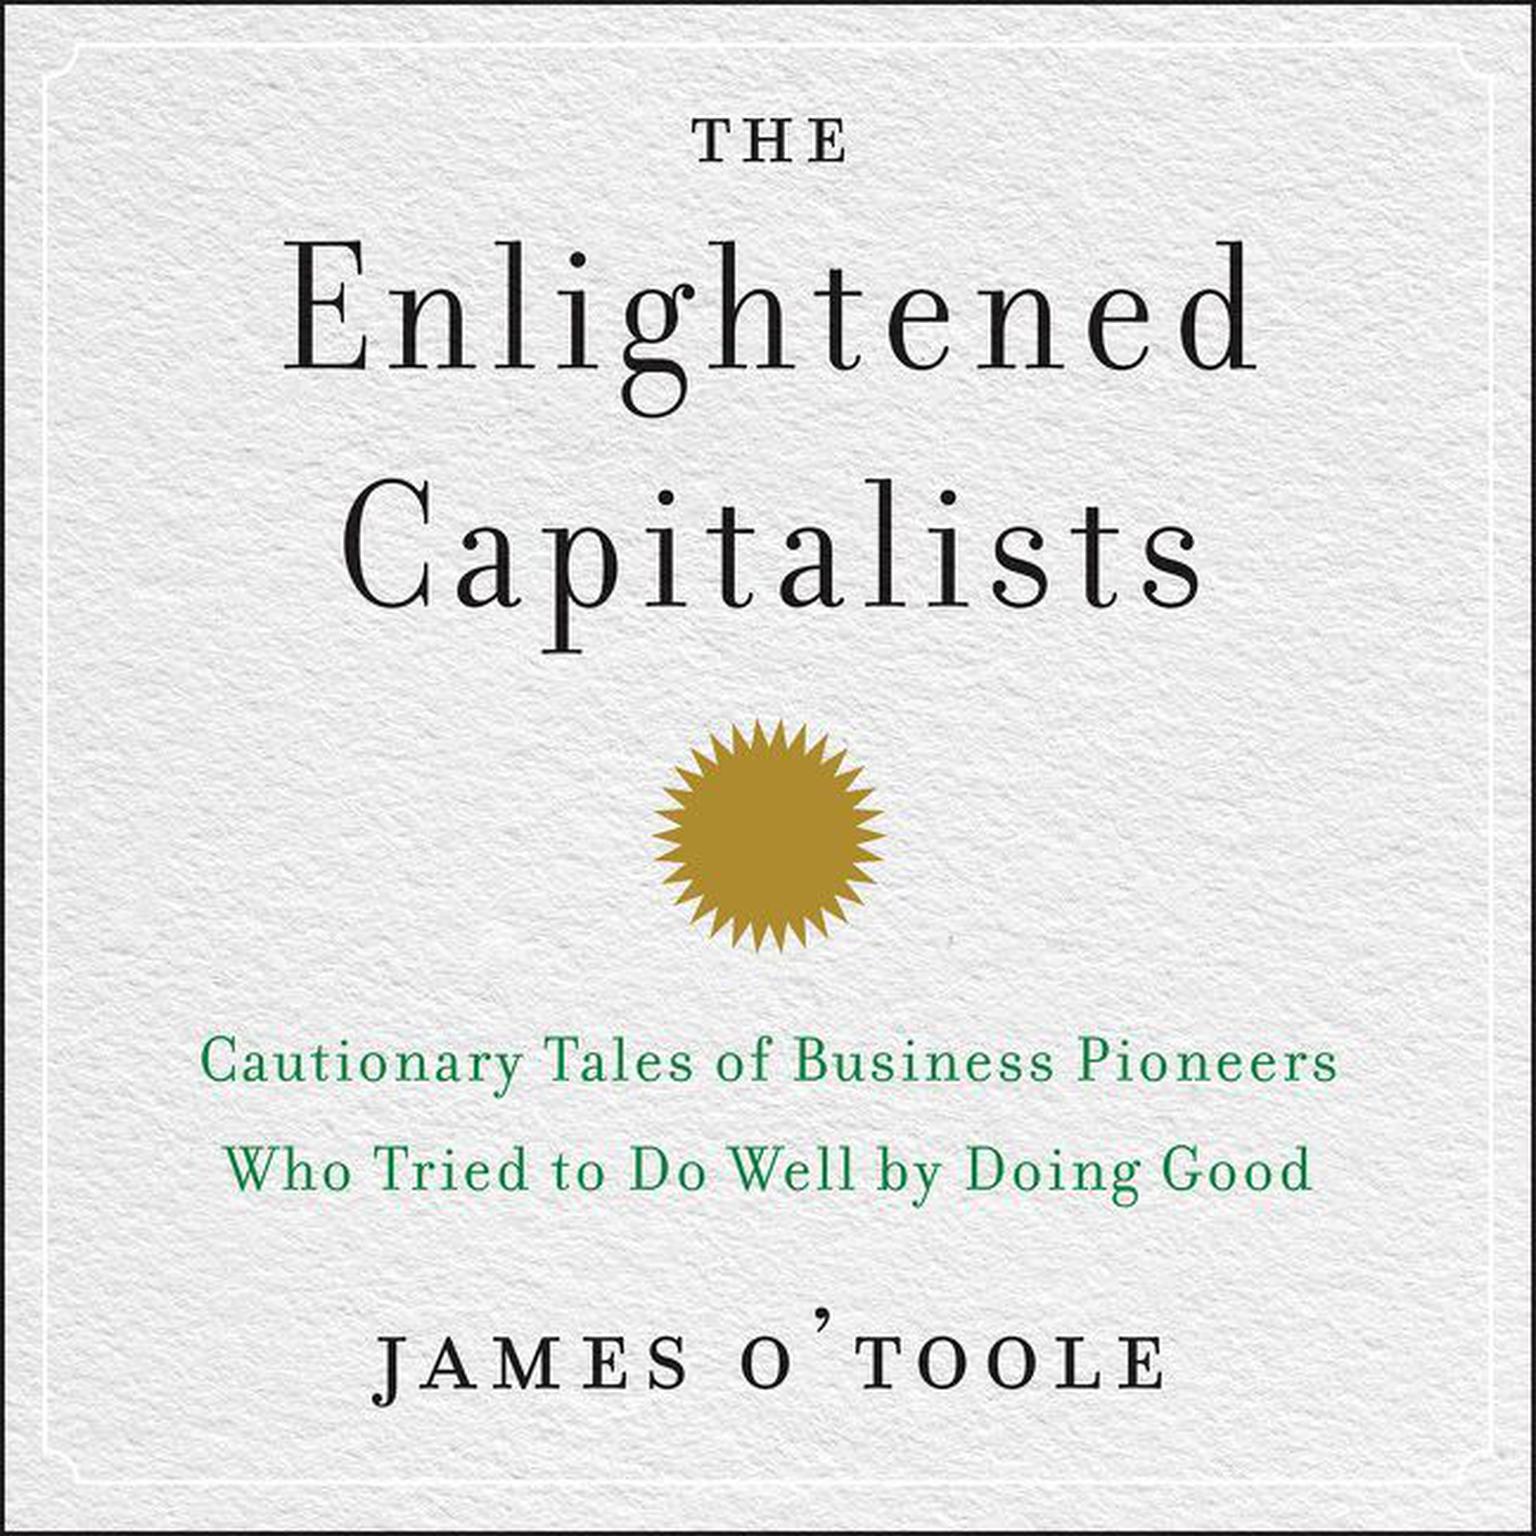 The Enlightened Capitalists: Cautionary Tales of Business Pioneers Who Tried to Do Well by Doing Good Audiobook, by James O’Toole